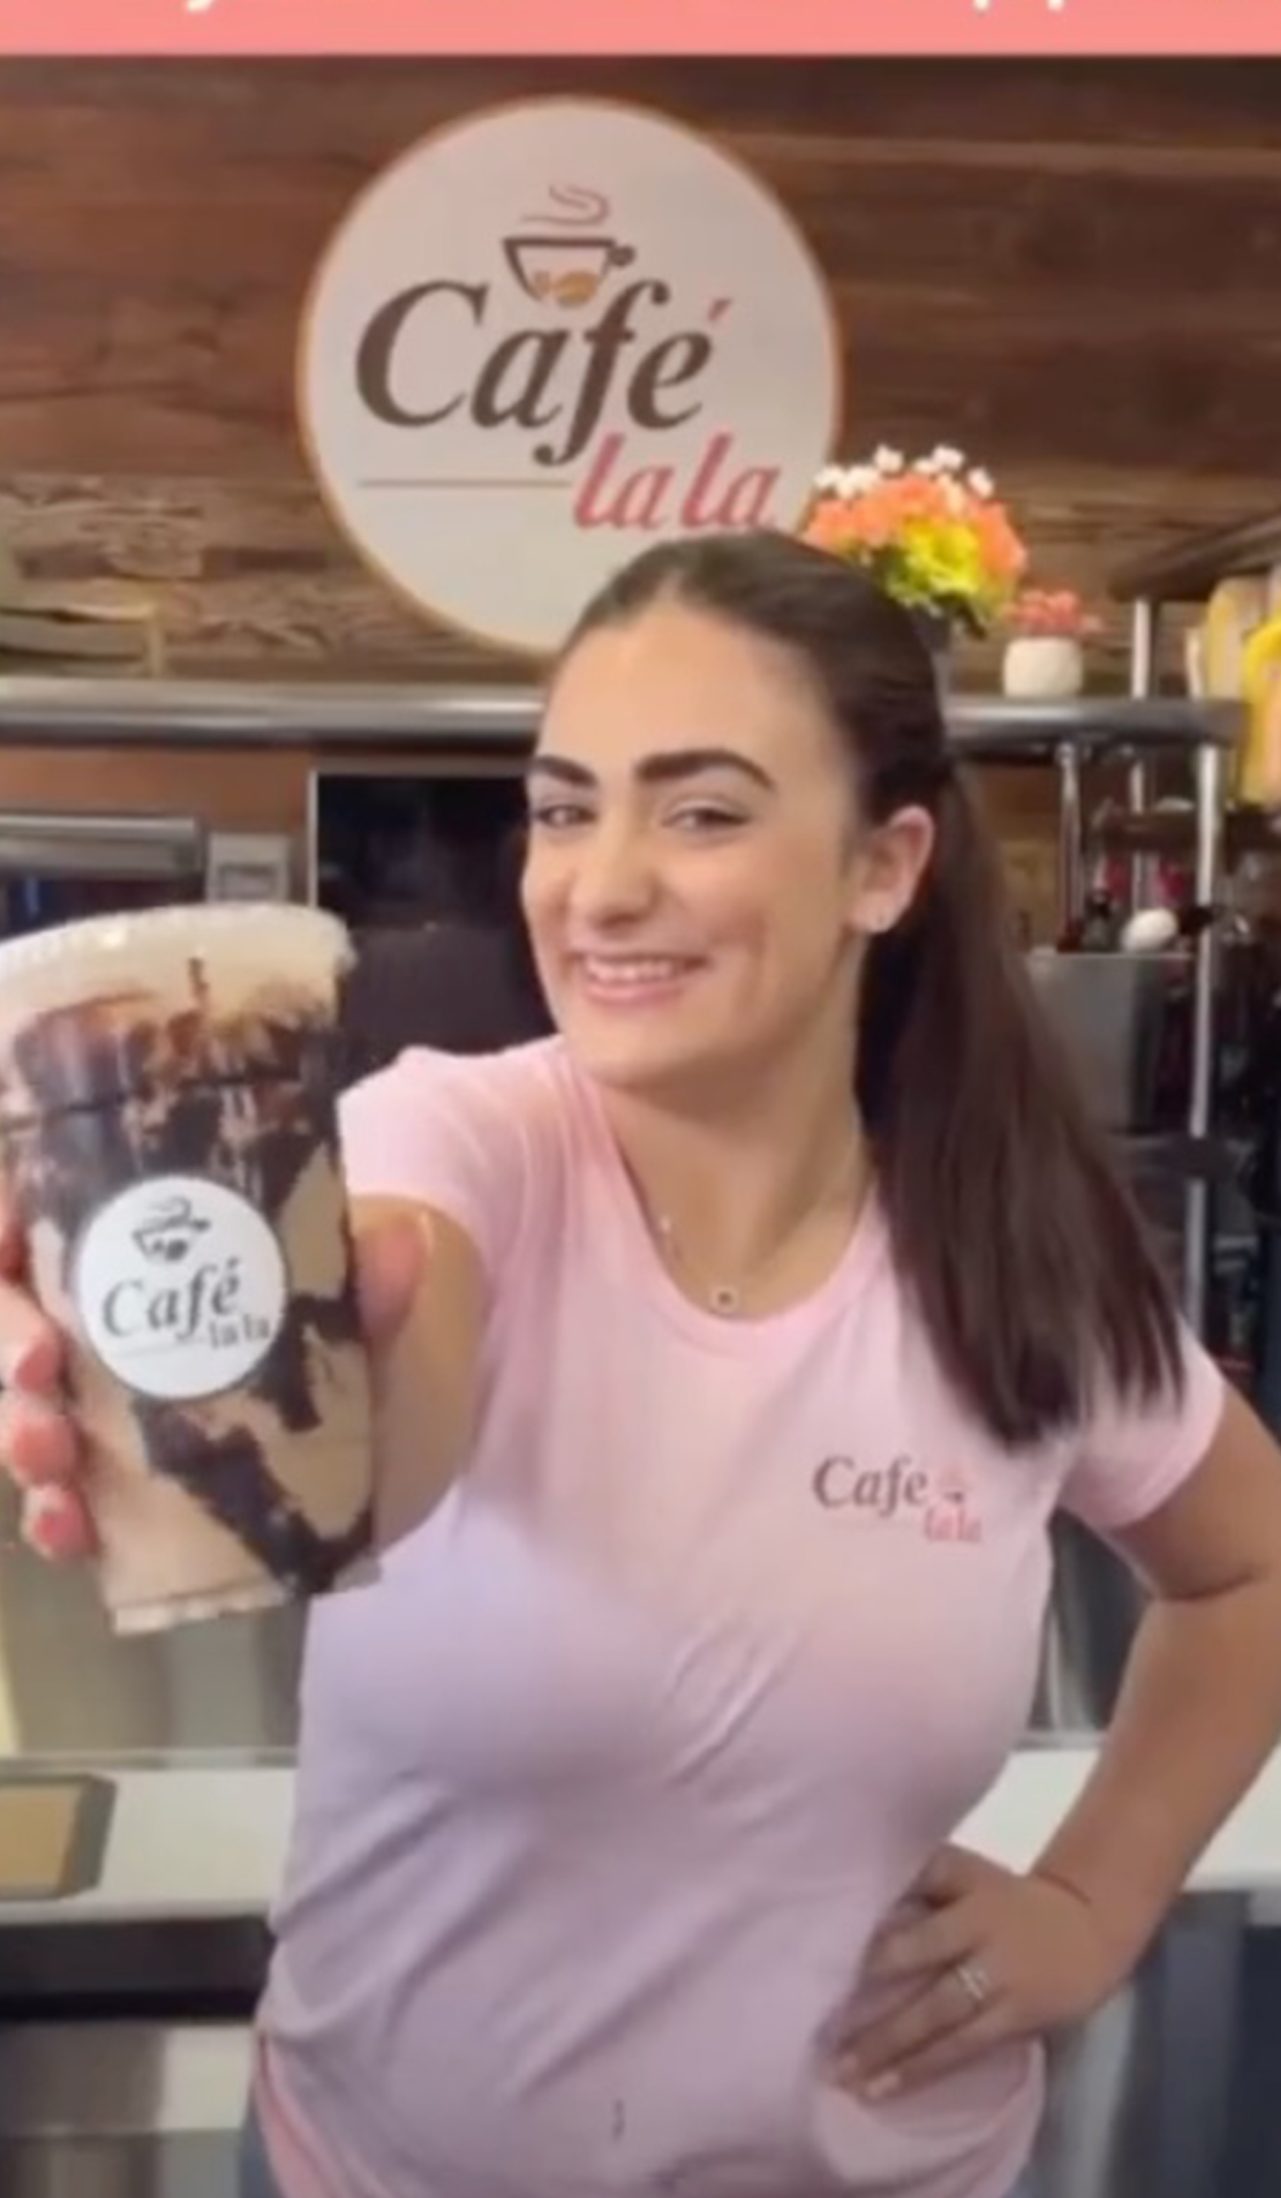 Romance is brewing: The busty barista owns a coffee shop in Rhode Island. 